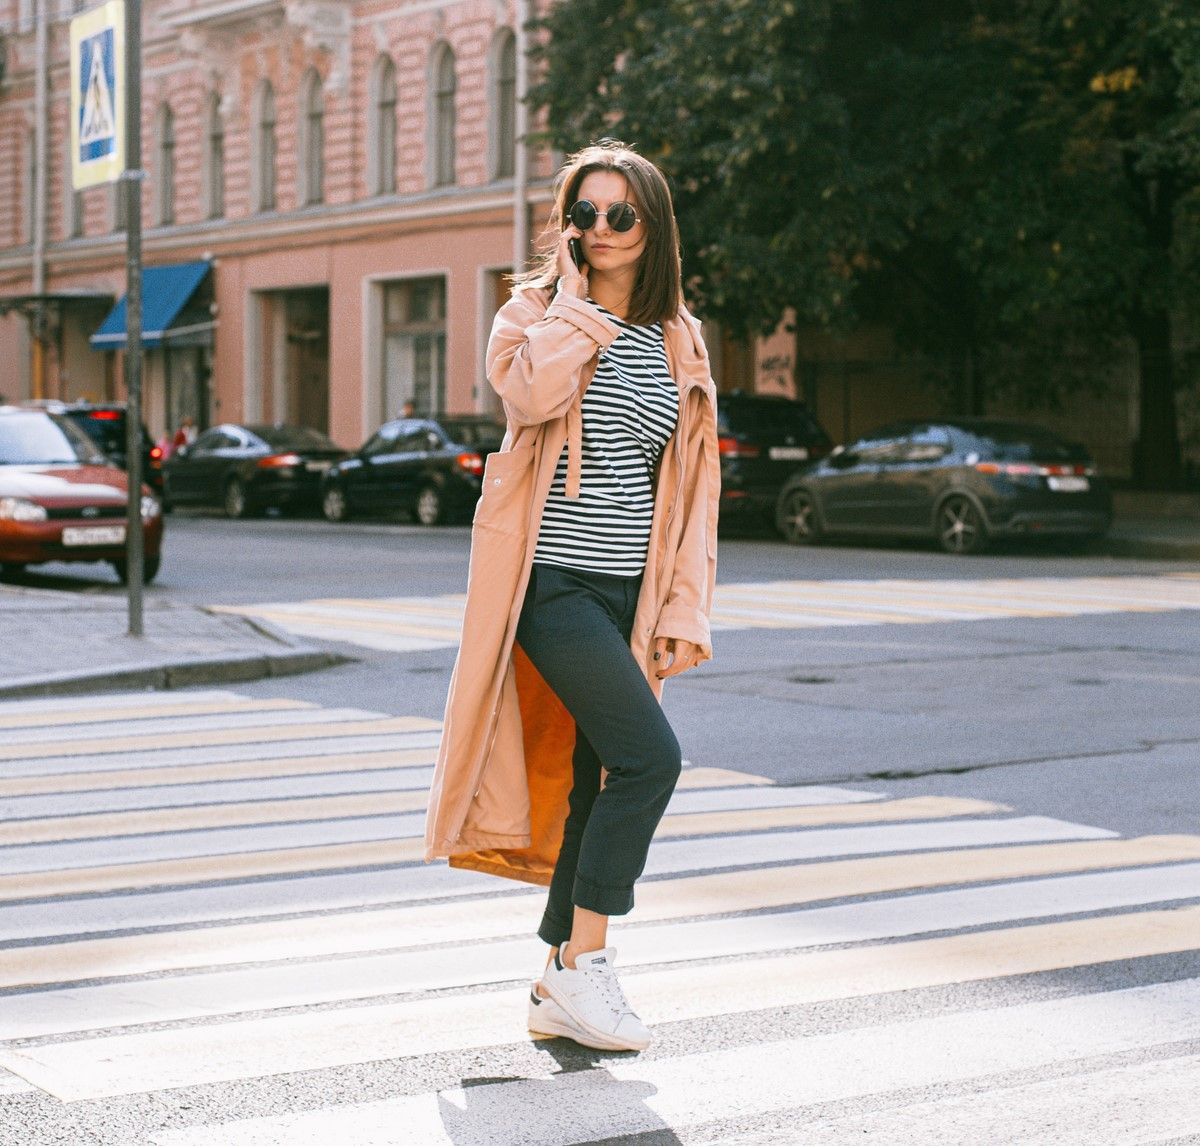 Striped shirt outfits - What to wear with basic striped tops